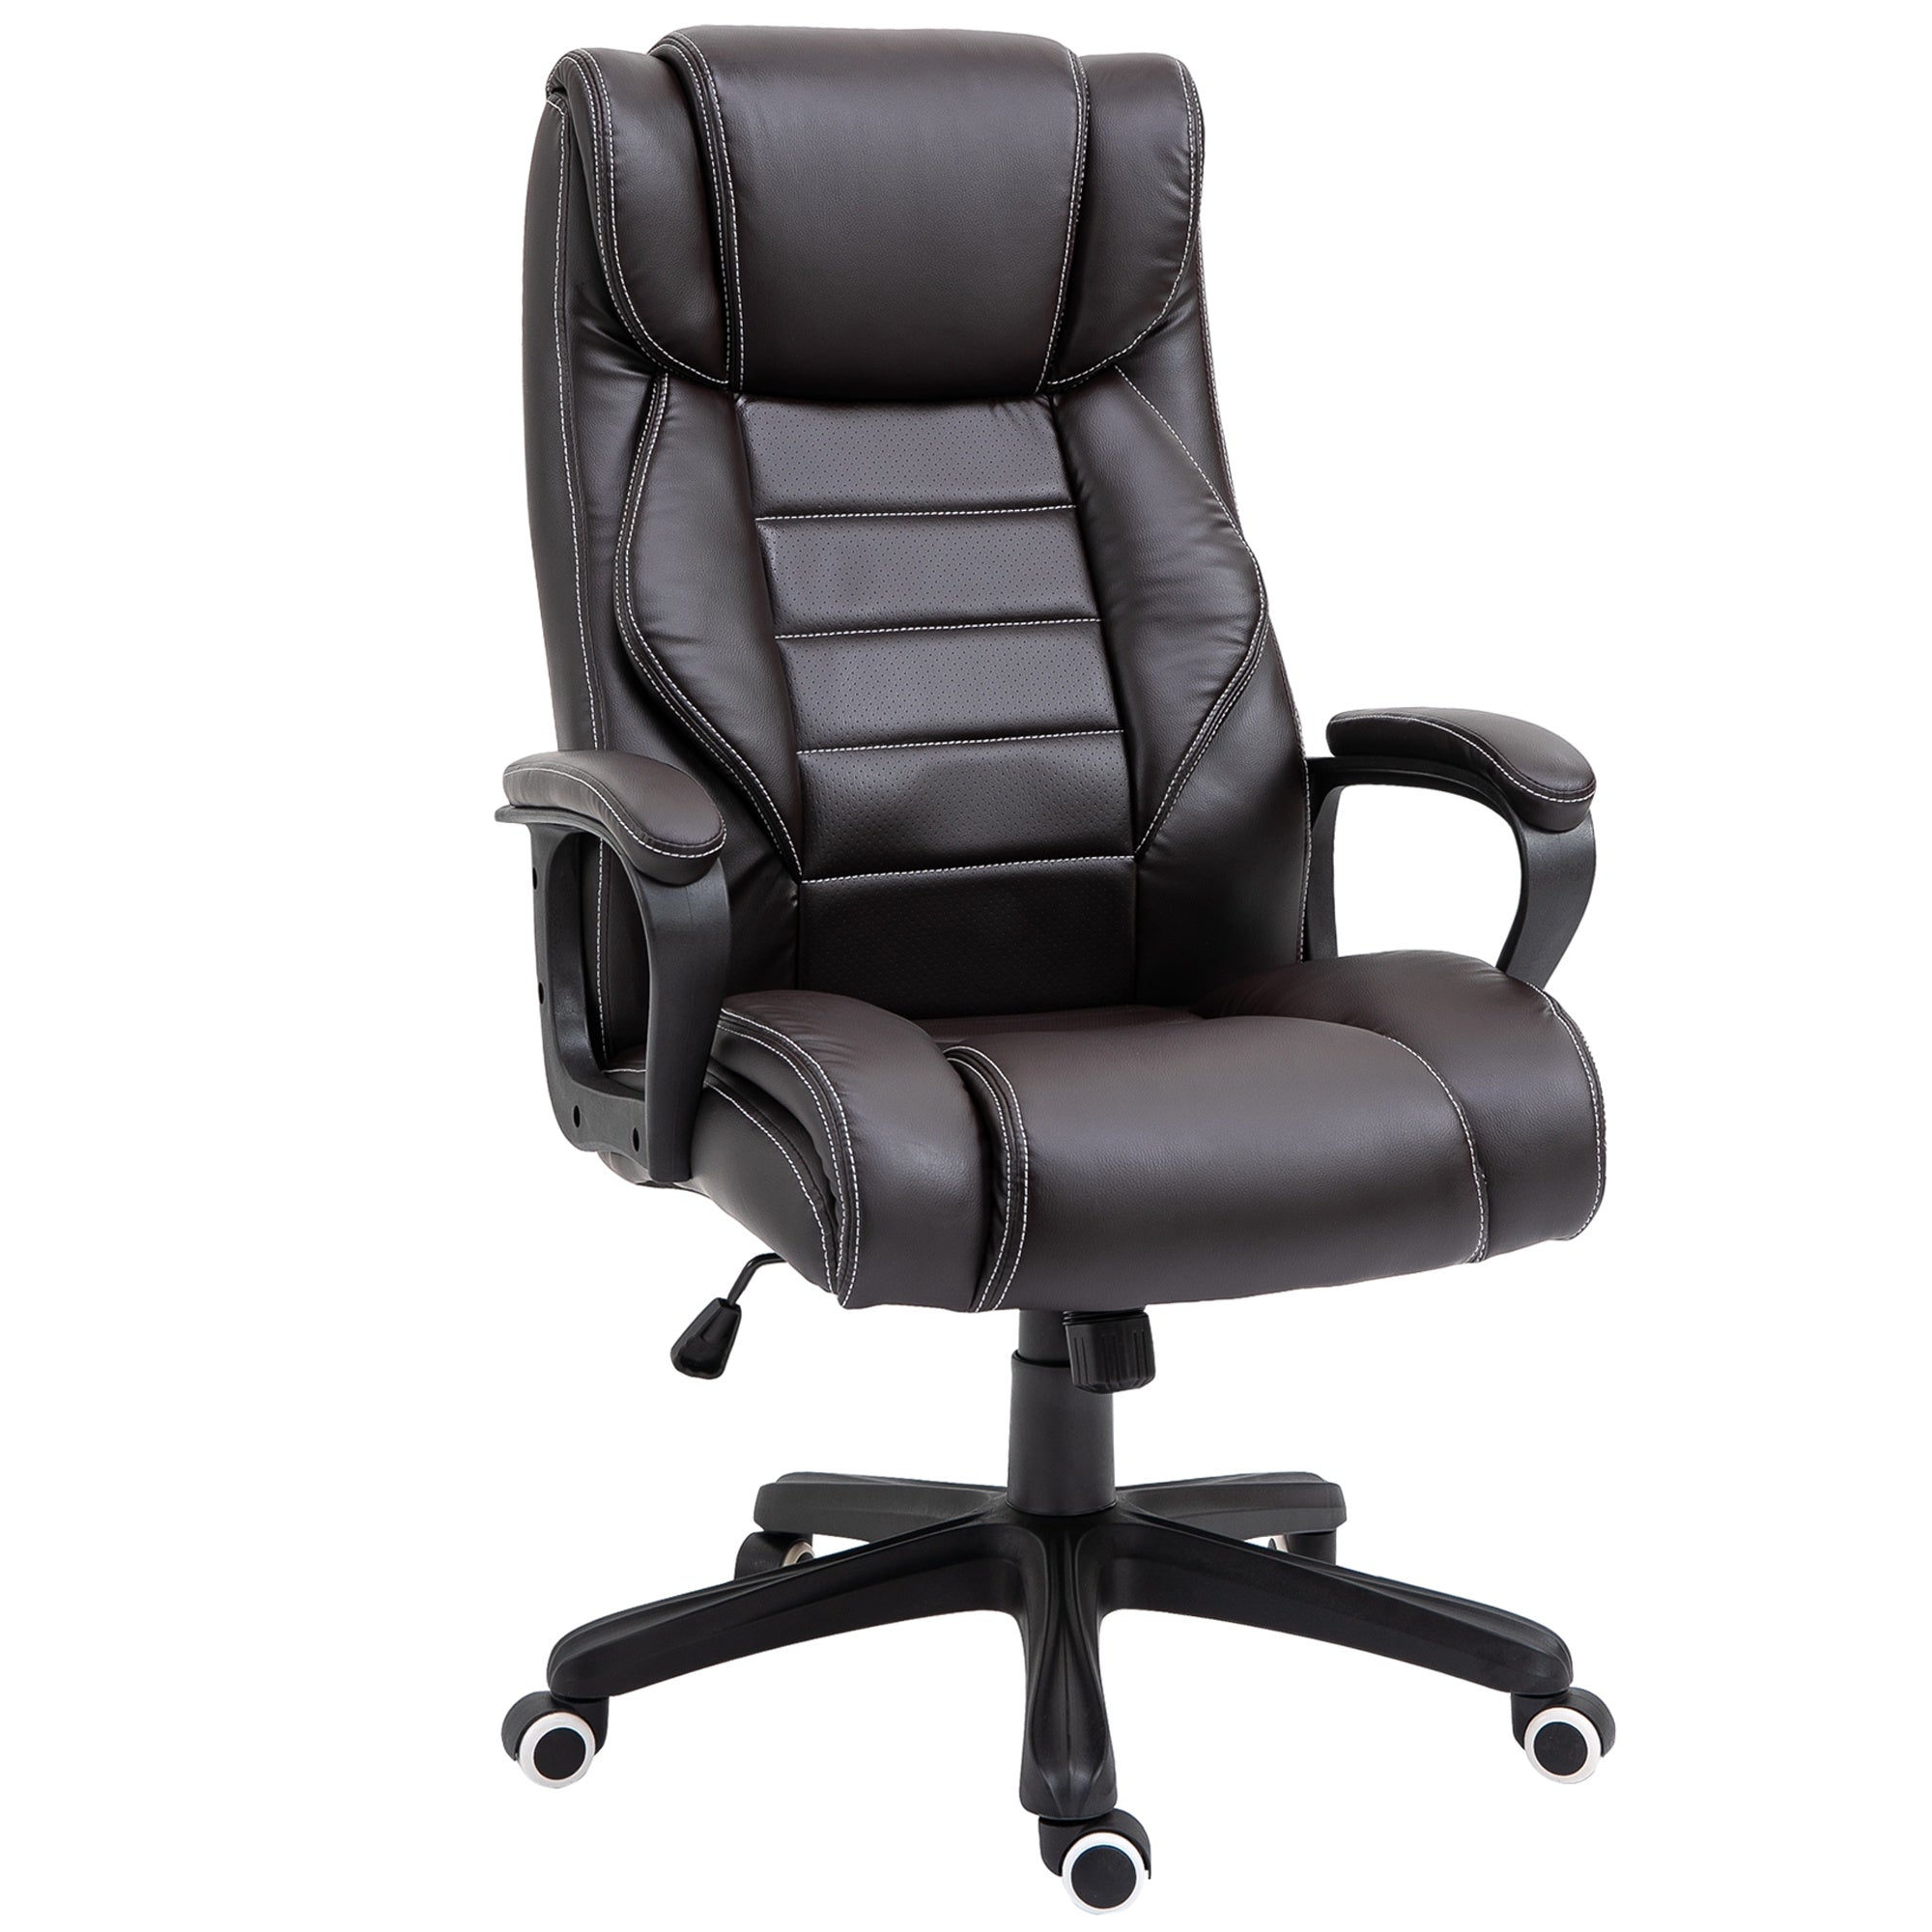 Vinsetto High Back Executive Office Chair 6- Point Vibration Massage Extra Padded Swivel Ergonomic Tilt Desk Seat Brown 6 Points Chair - TJ Hughes